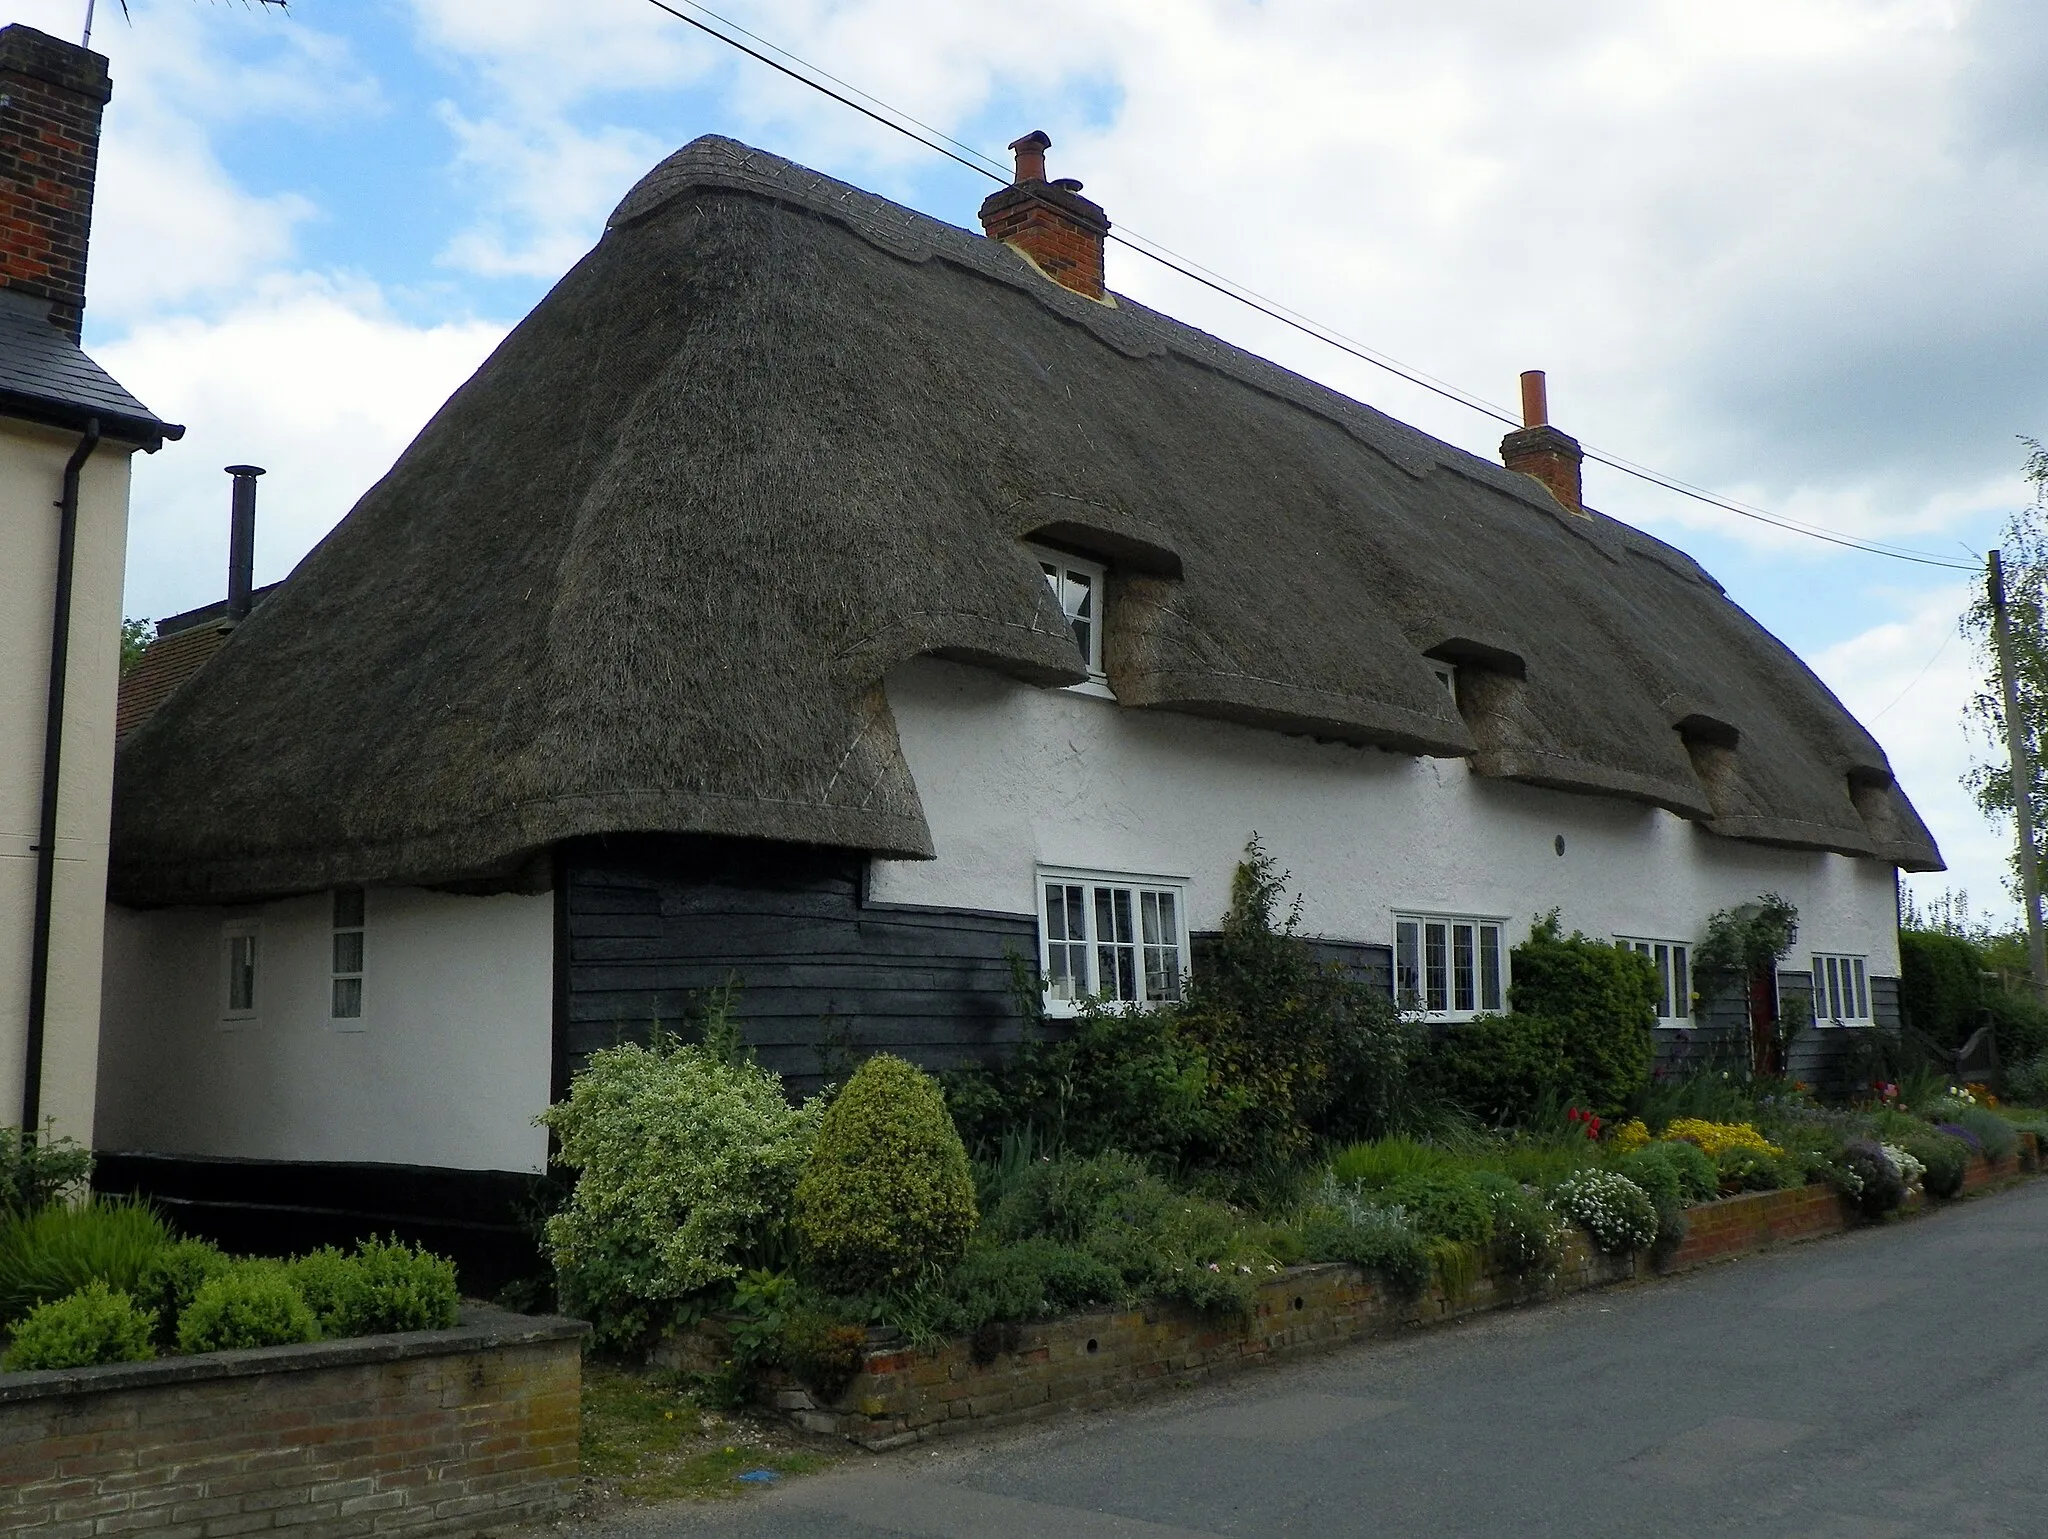 Photo showing: Thatch End, Furneux Pelham, Hertfordshire (Grade II).

GOC Hertfordshire's walk on 14 May 2016, in and around Furneux Pelham, Brent Pelham and Stocking Pelham, Hertfordshire. David W led this 10.2-mile walk, attended by 16 people. You can view my other photos of this event, read the original event report, find out more about the Gay Outdoor Club or see my collections.